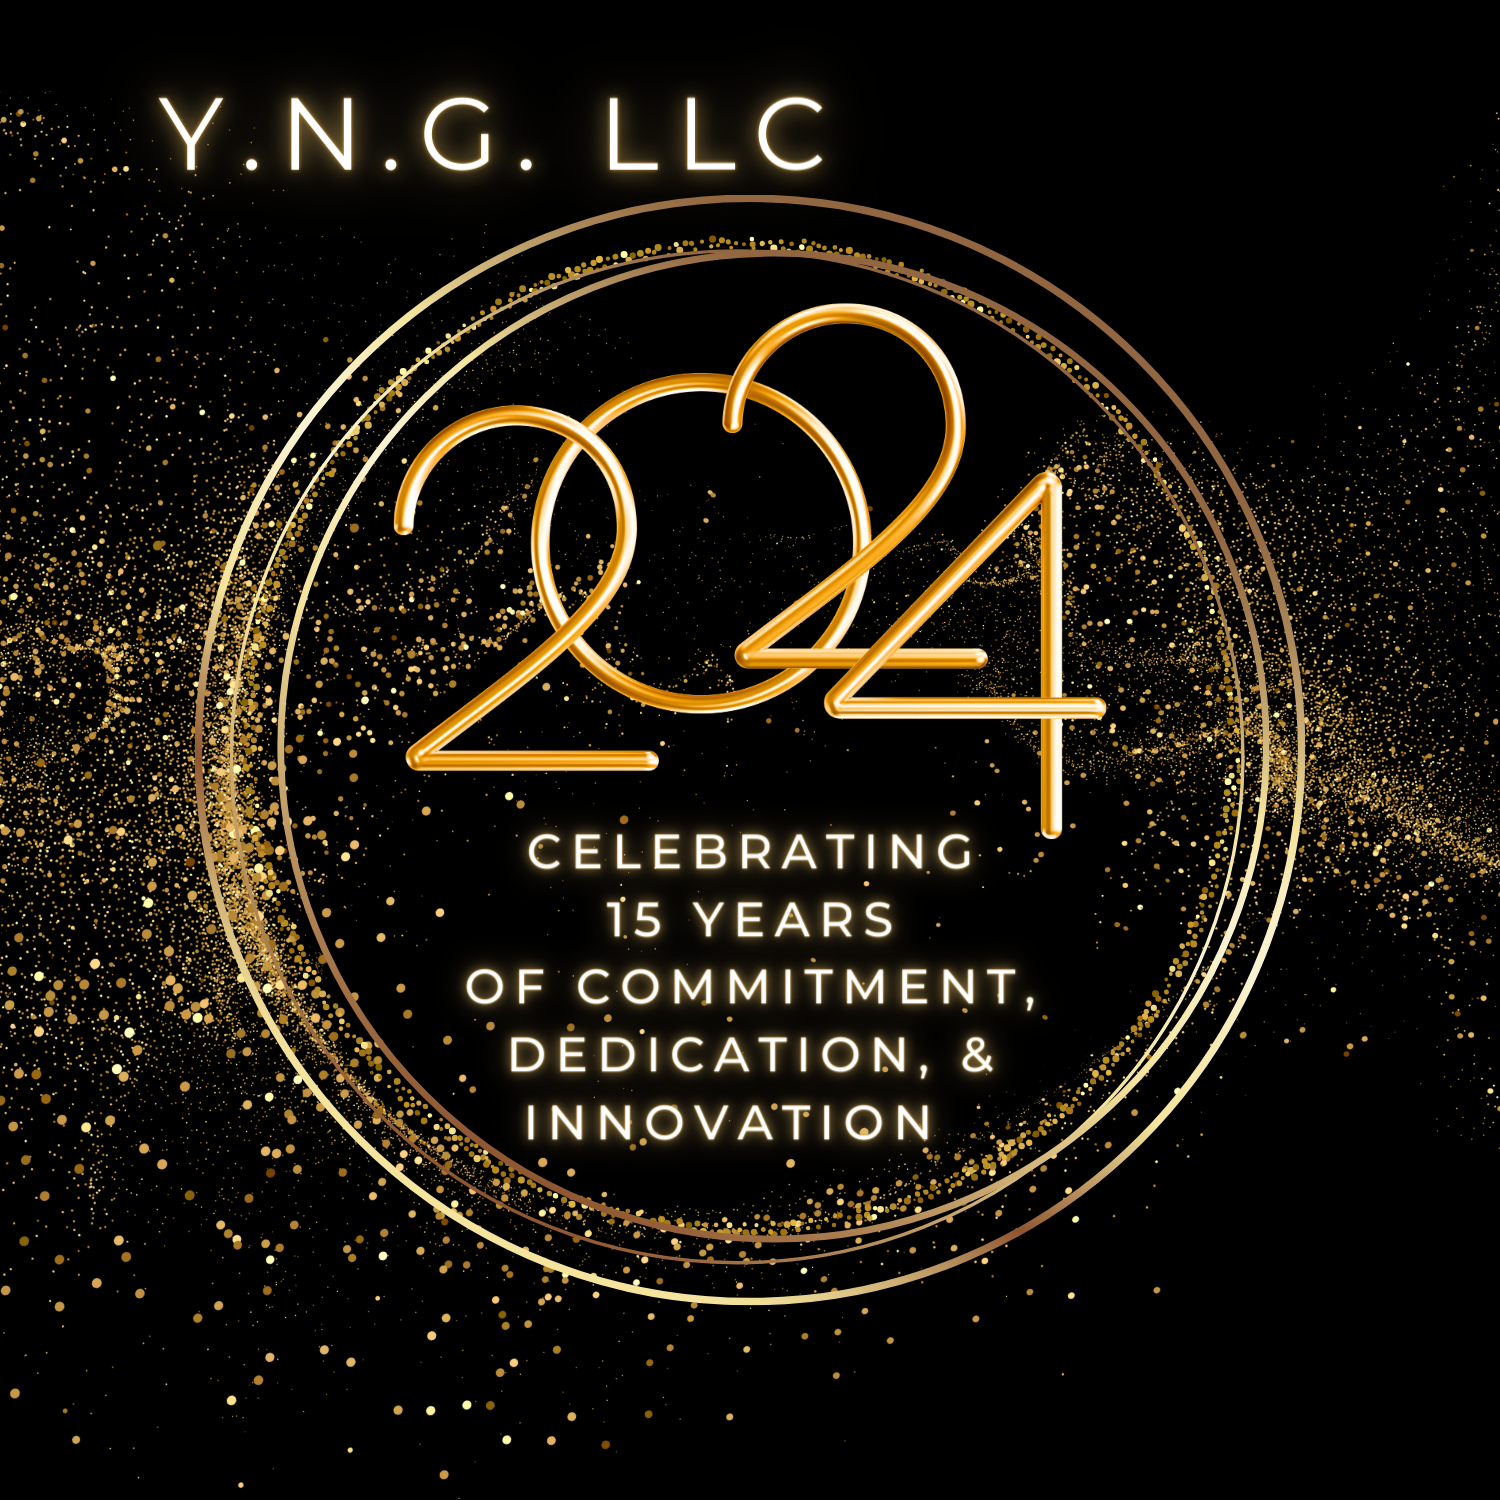 Black background with gold font and circle with glitter. Y.N.G. LLC 2024 Celebrating 15 Years of Commitment, Dedication, & Innovation